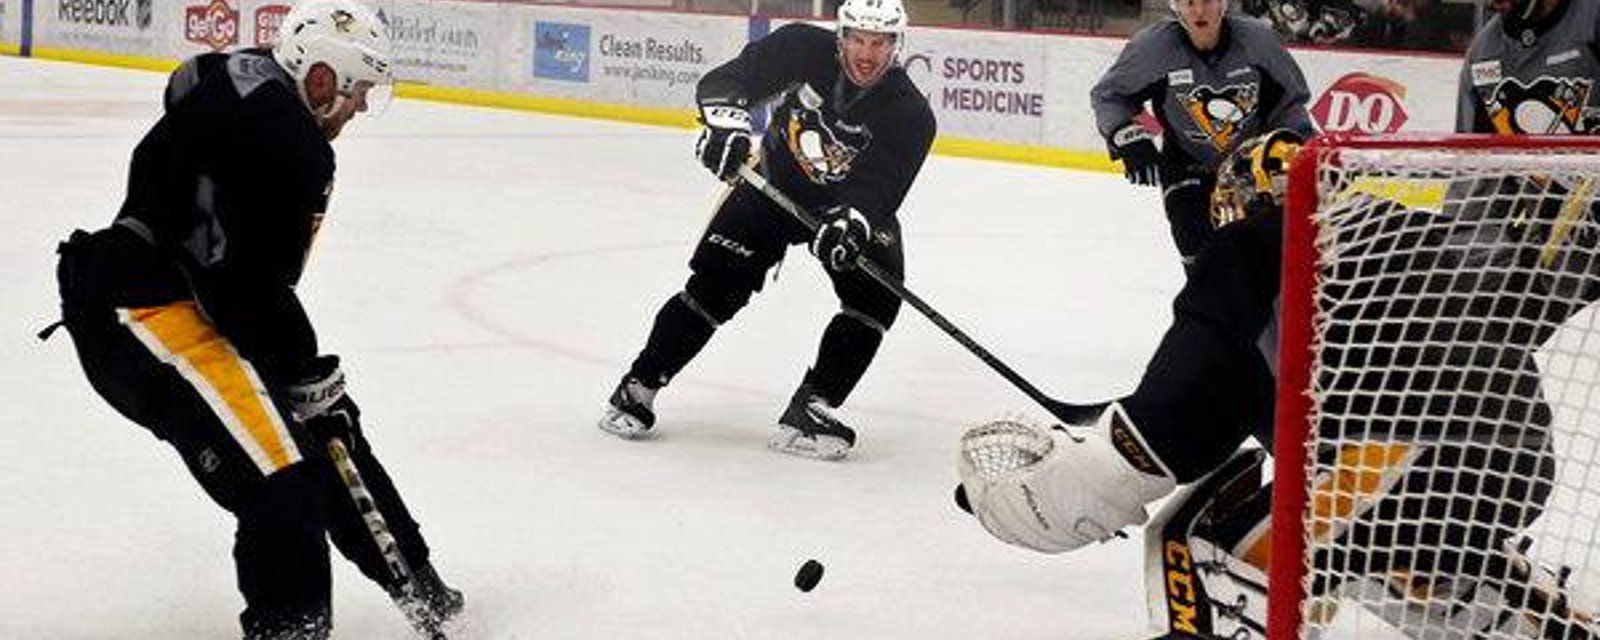 Penguins victims of a troll job by the Isles on the ice this morning? 